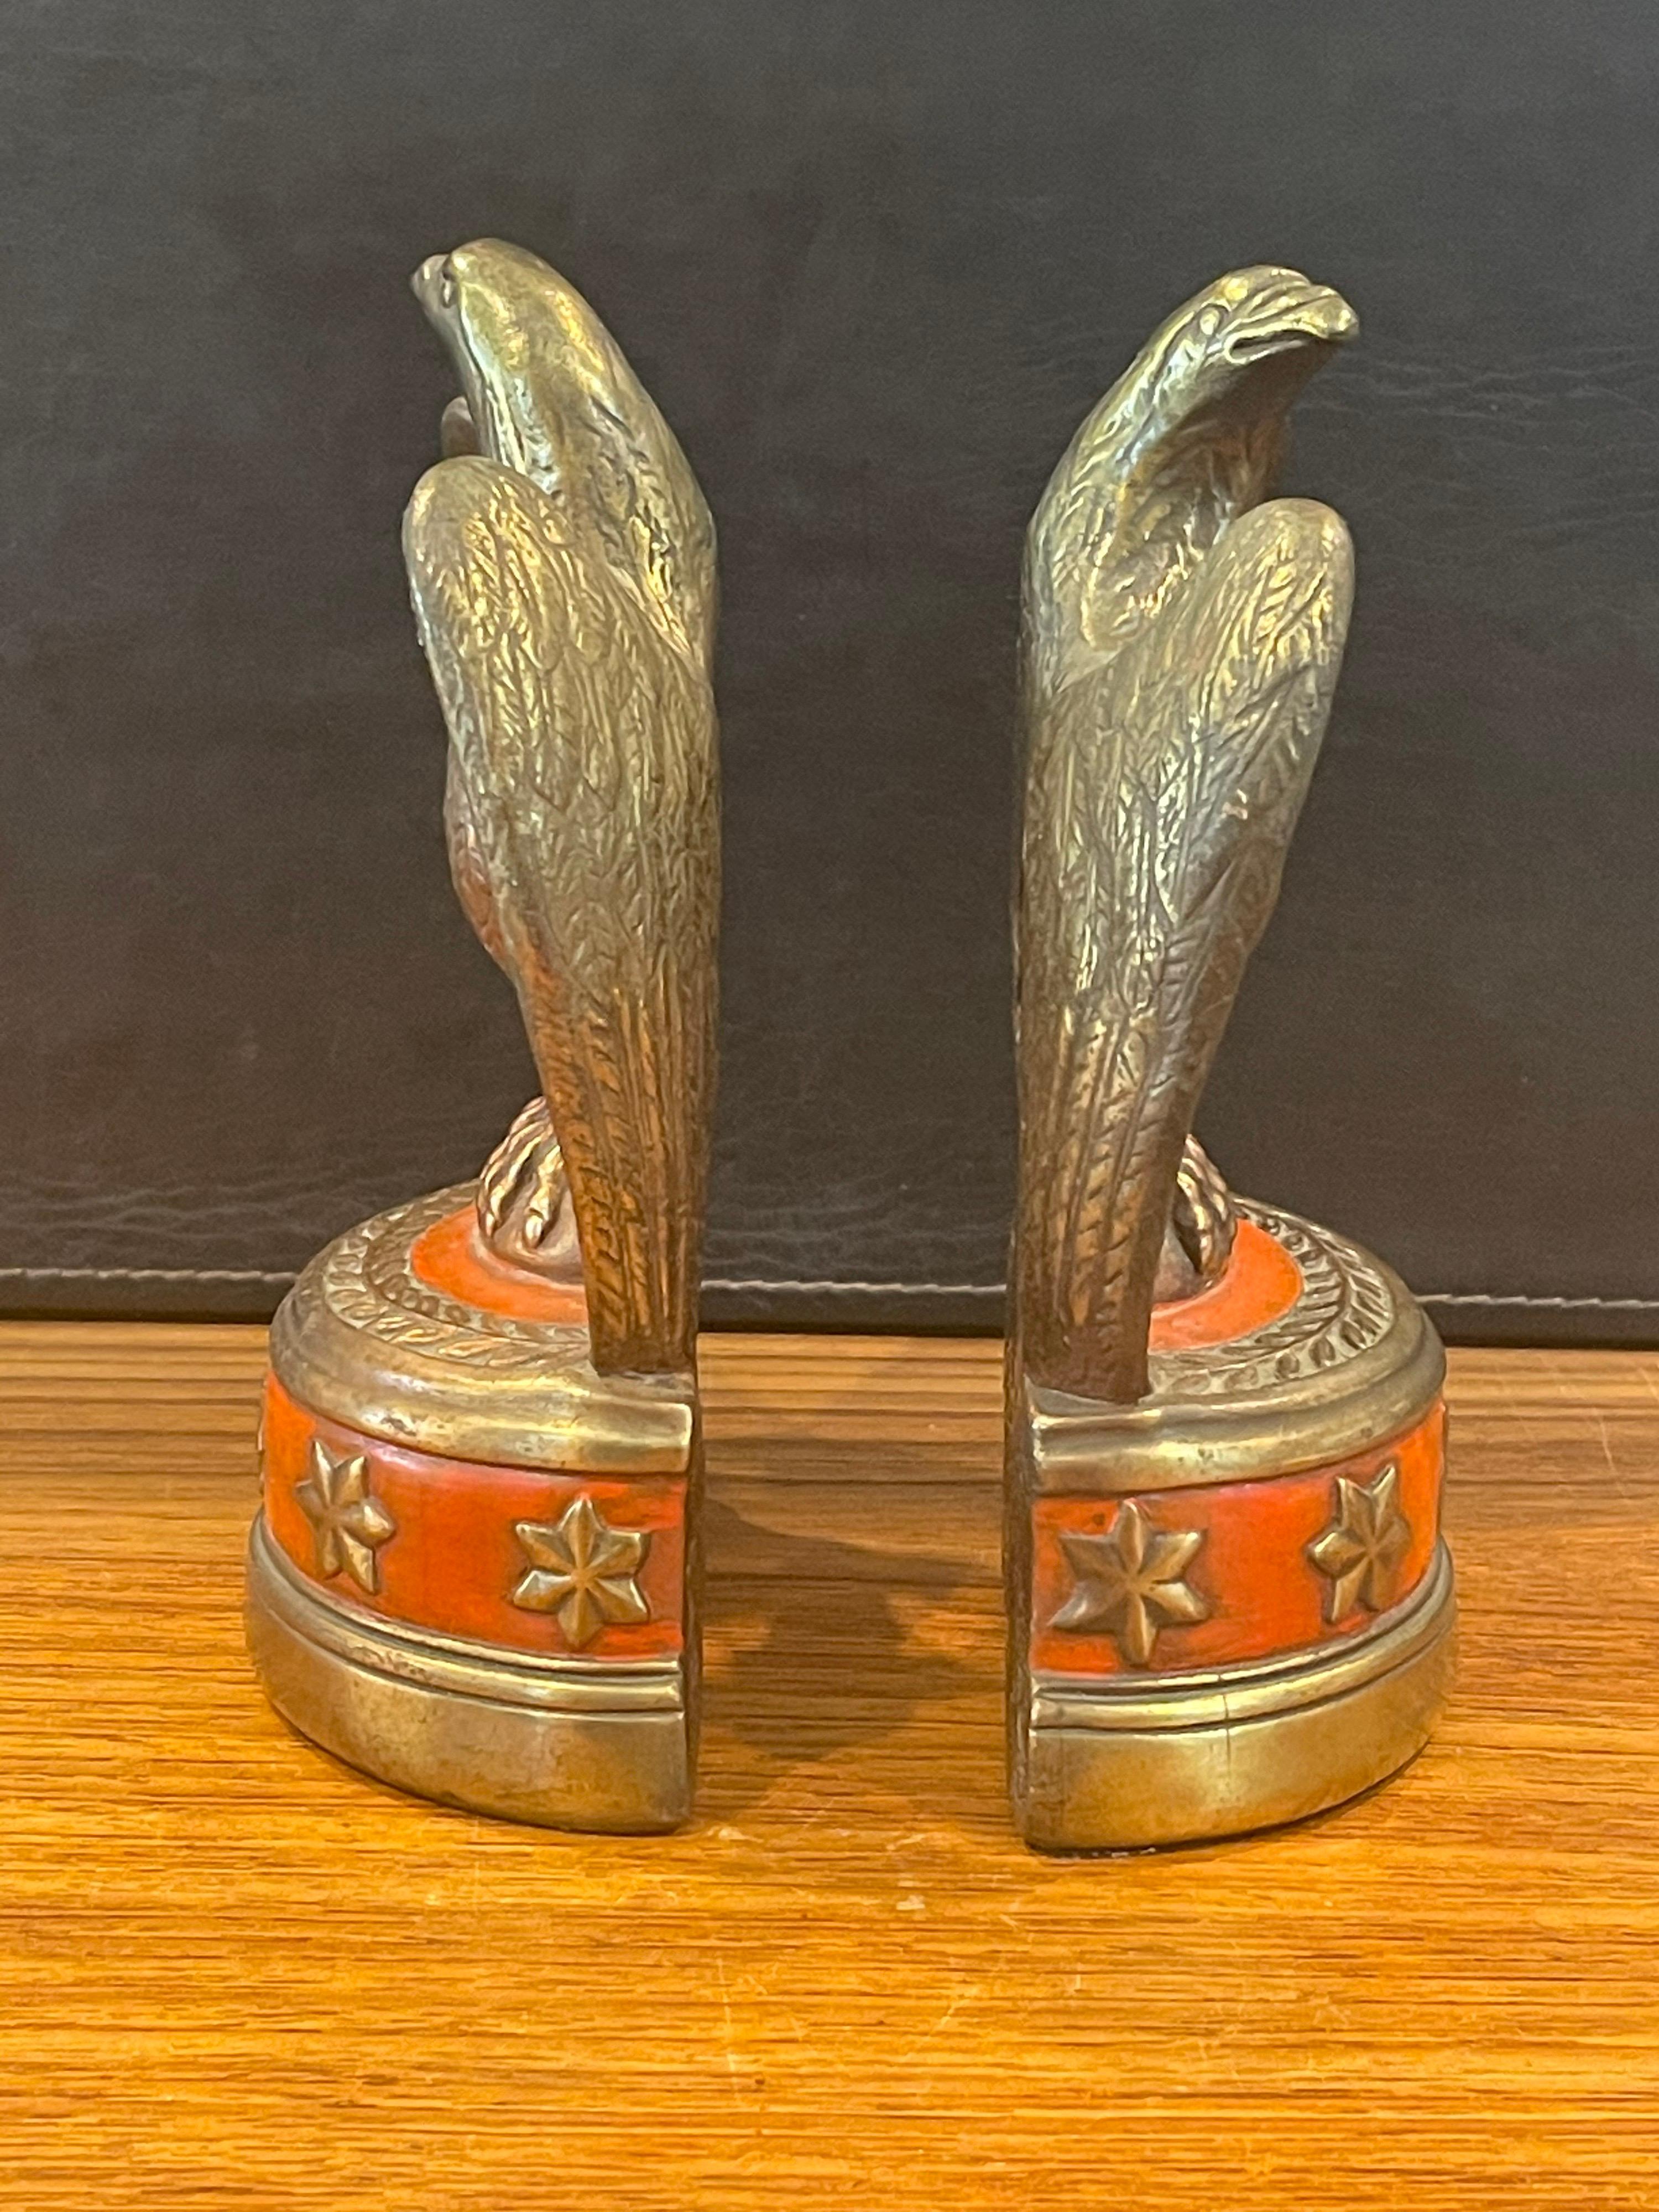 20th Century Pair of Bronze Clad American Eagle 'John Kennedy JFK' Bookends